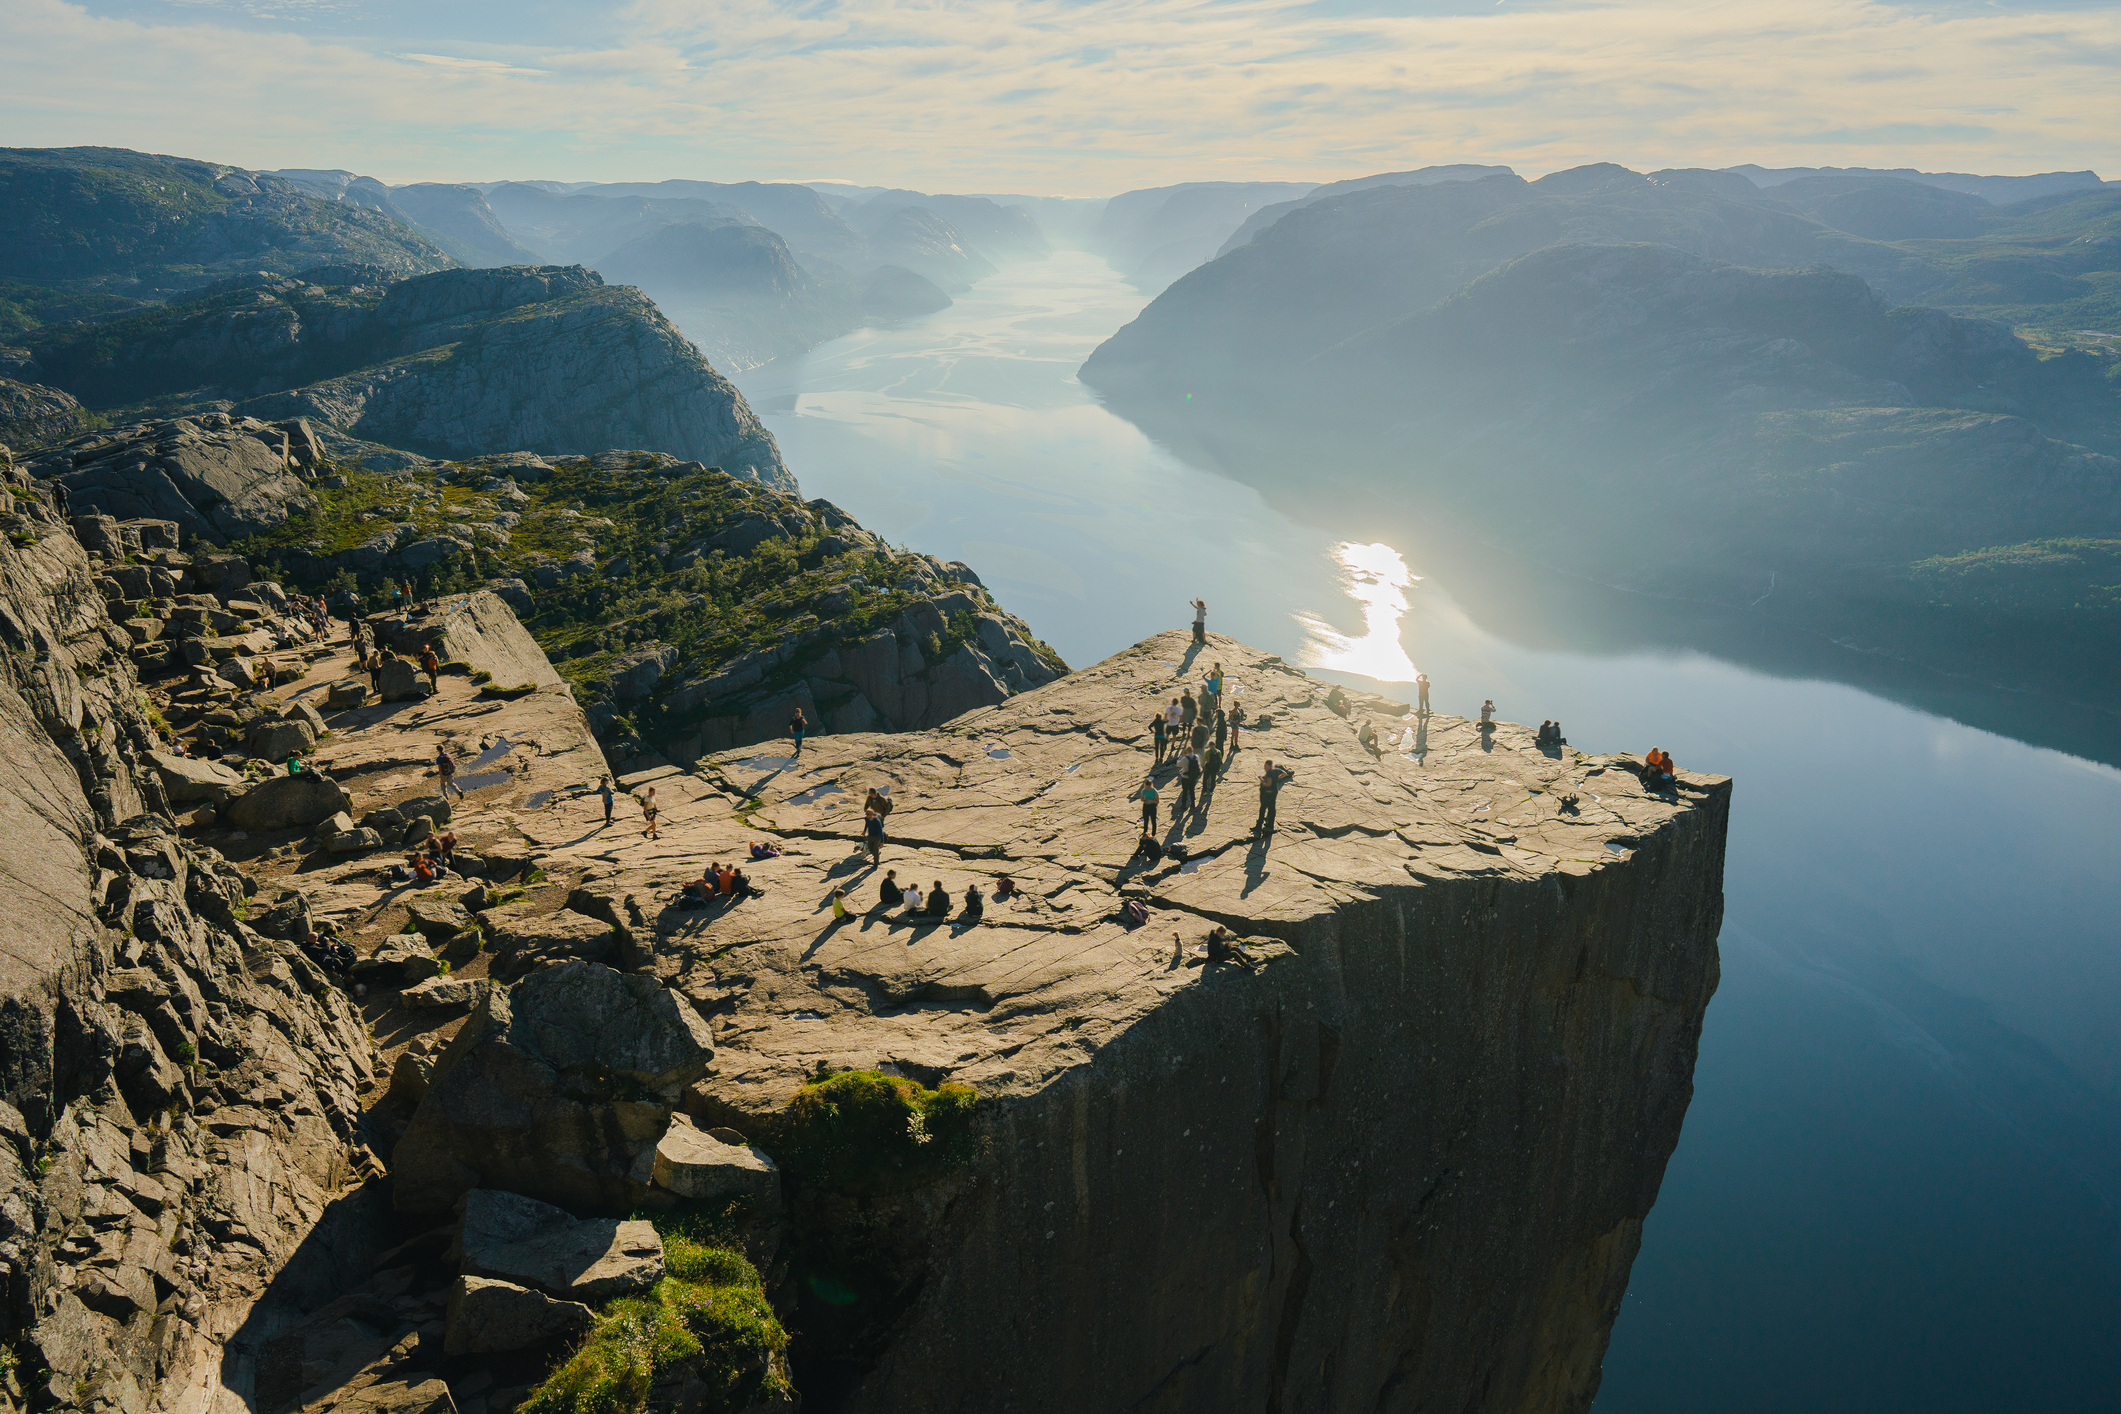 People stand and sit on the large, flat, cliff-top viewpoint of Preikestolen in Norway, overlooking a vast fjord landscape with mountains in the distance